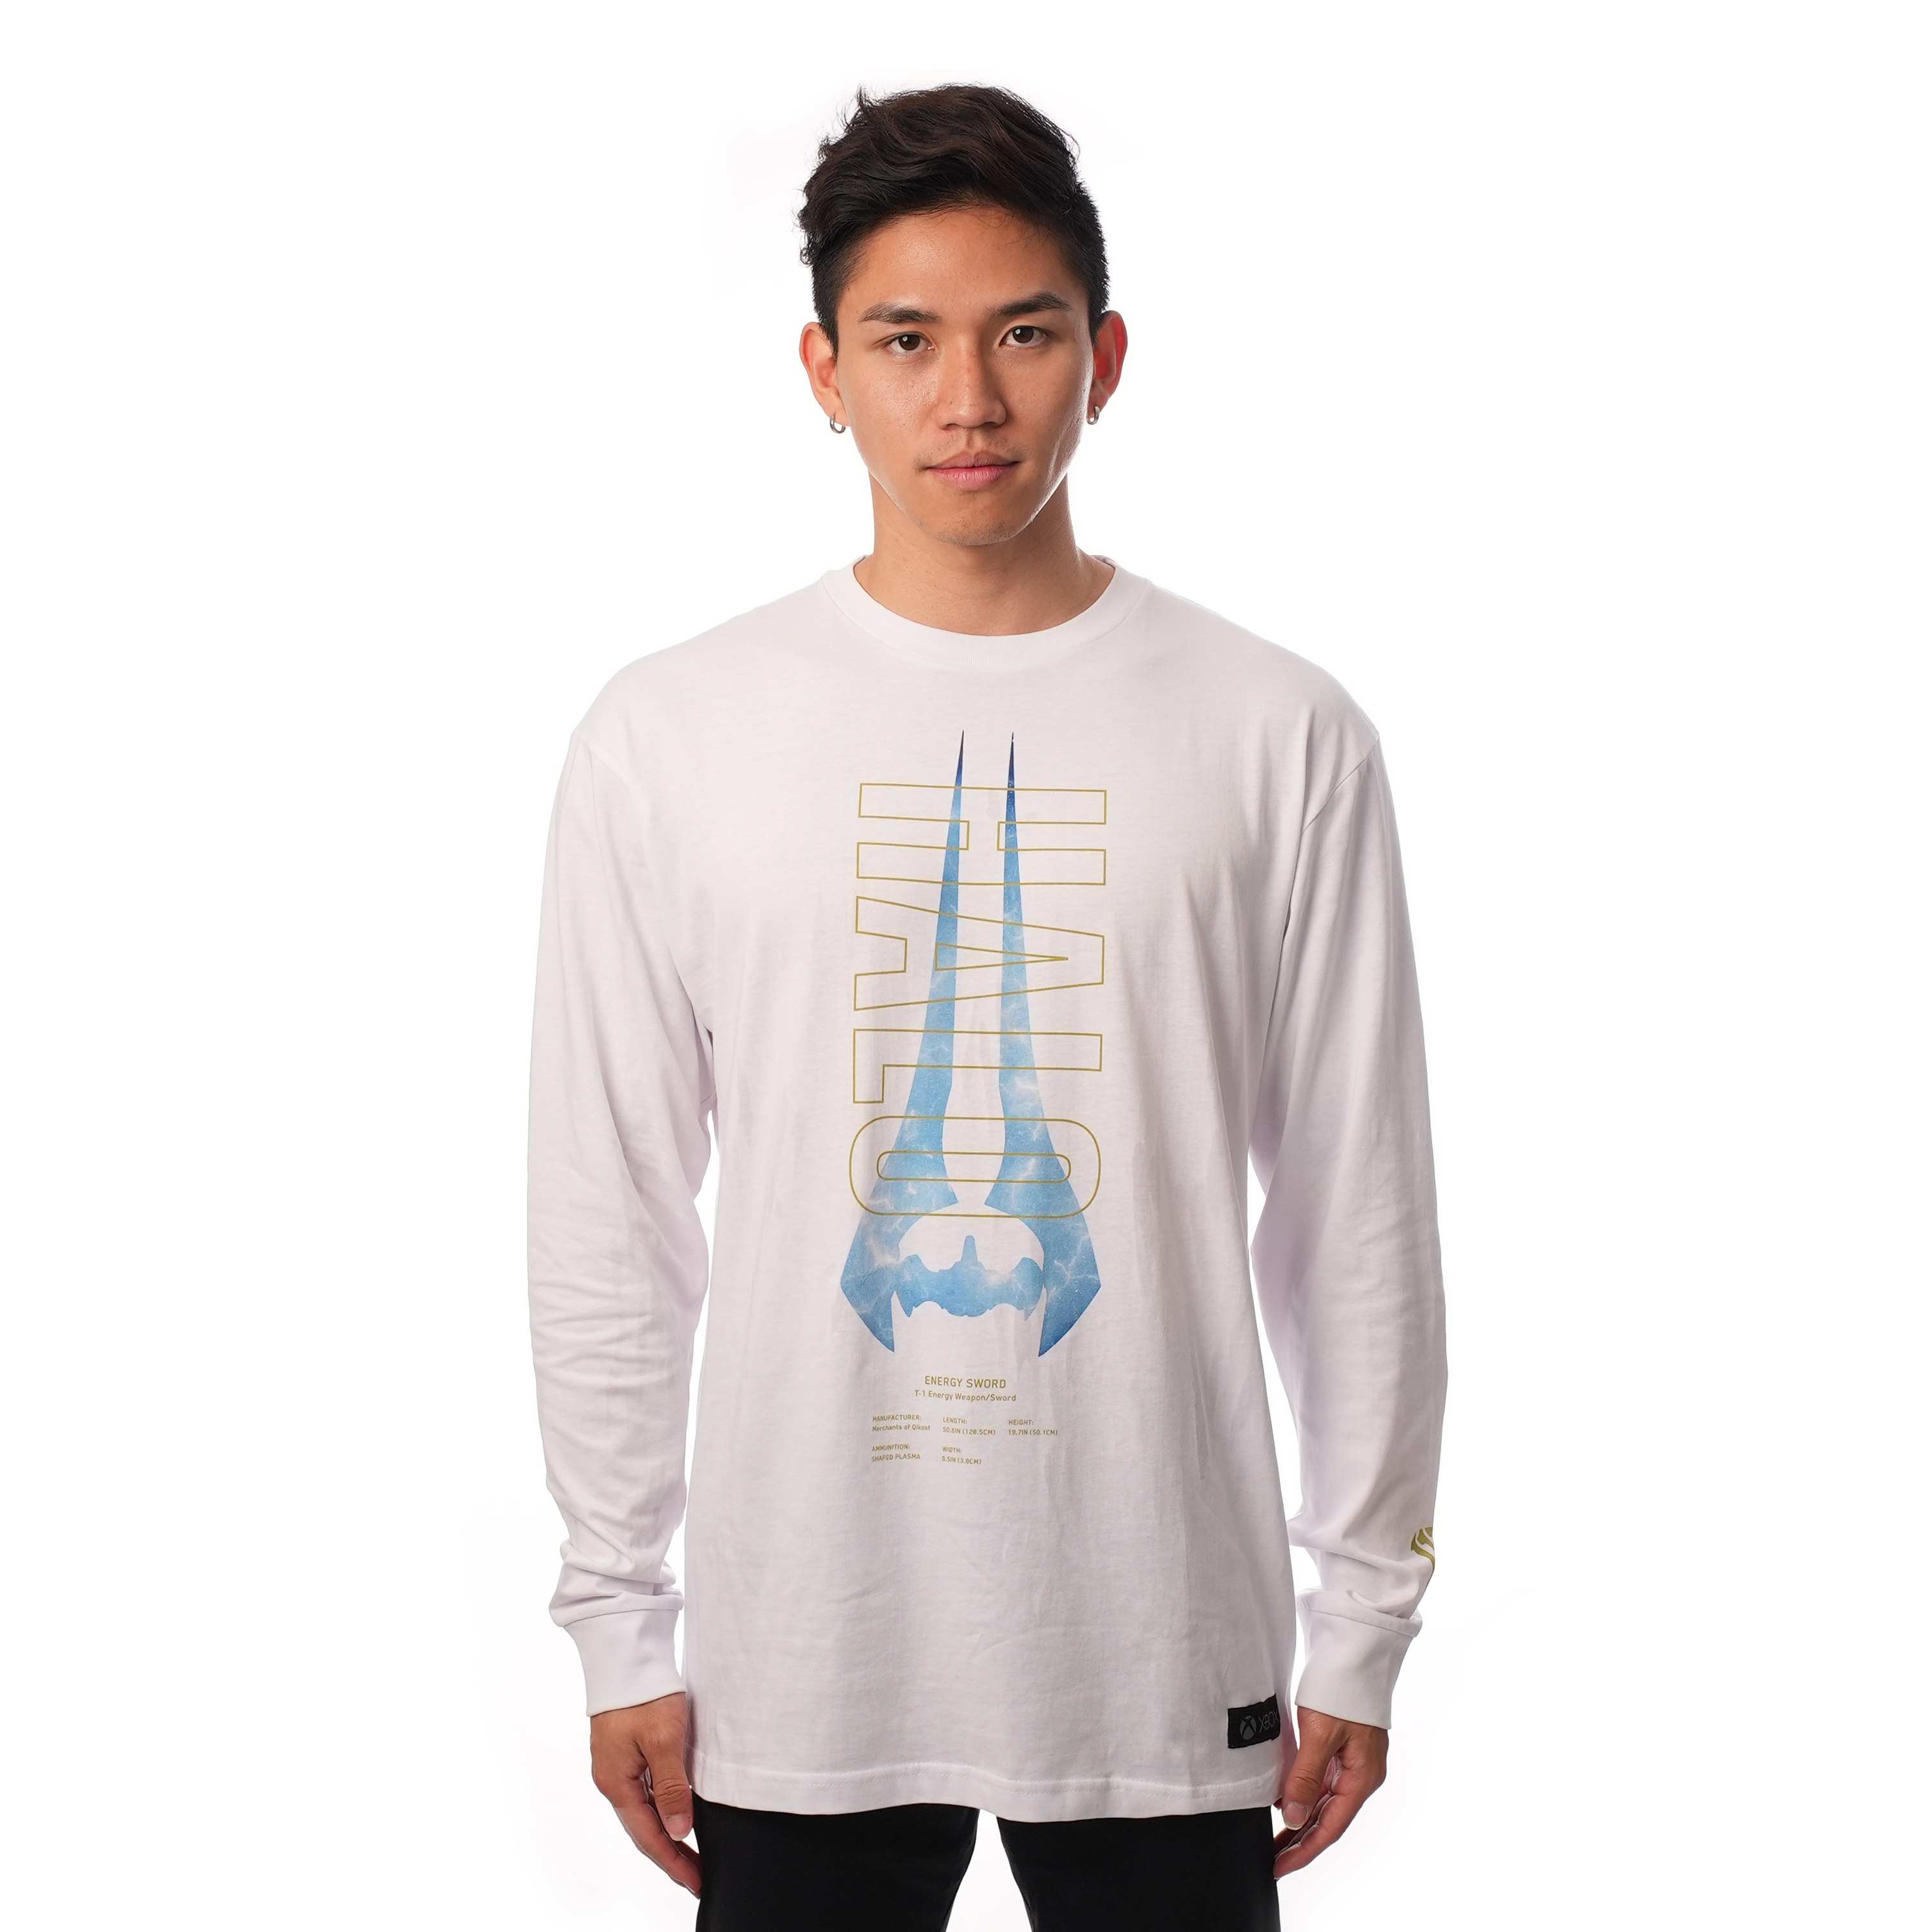 Zelos White 3/4 Sleeve Be The Energy Shirt, L Size L - $17 - From